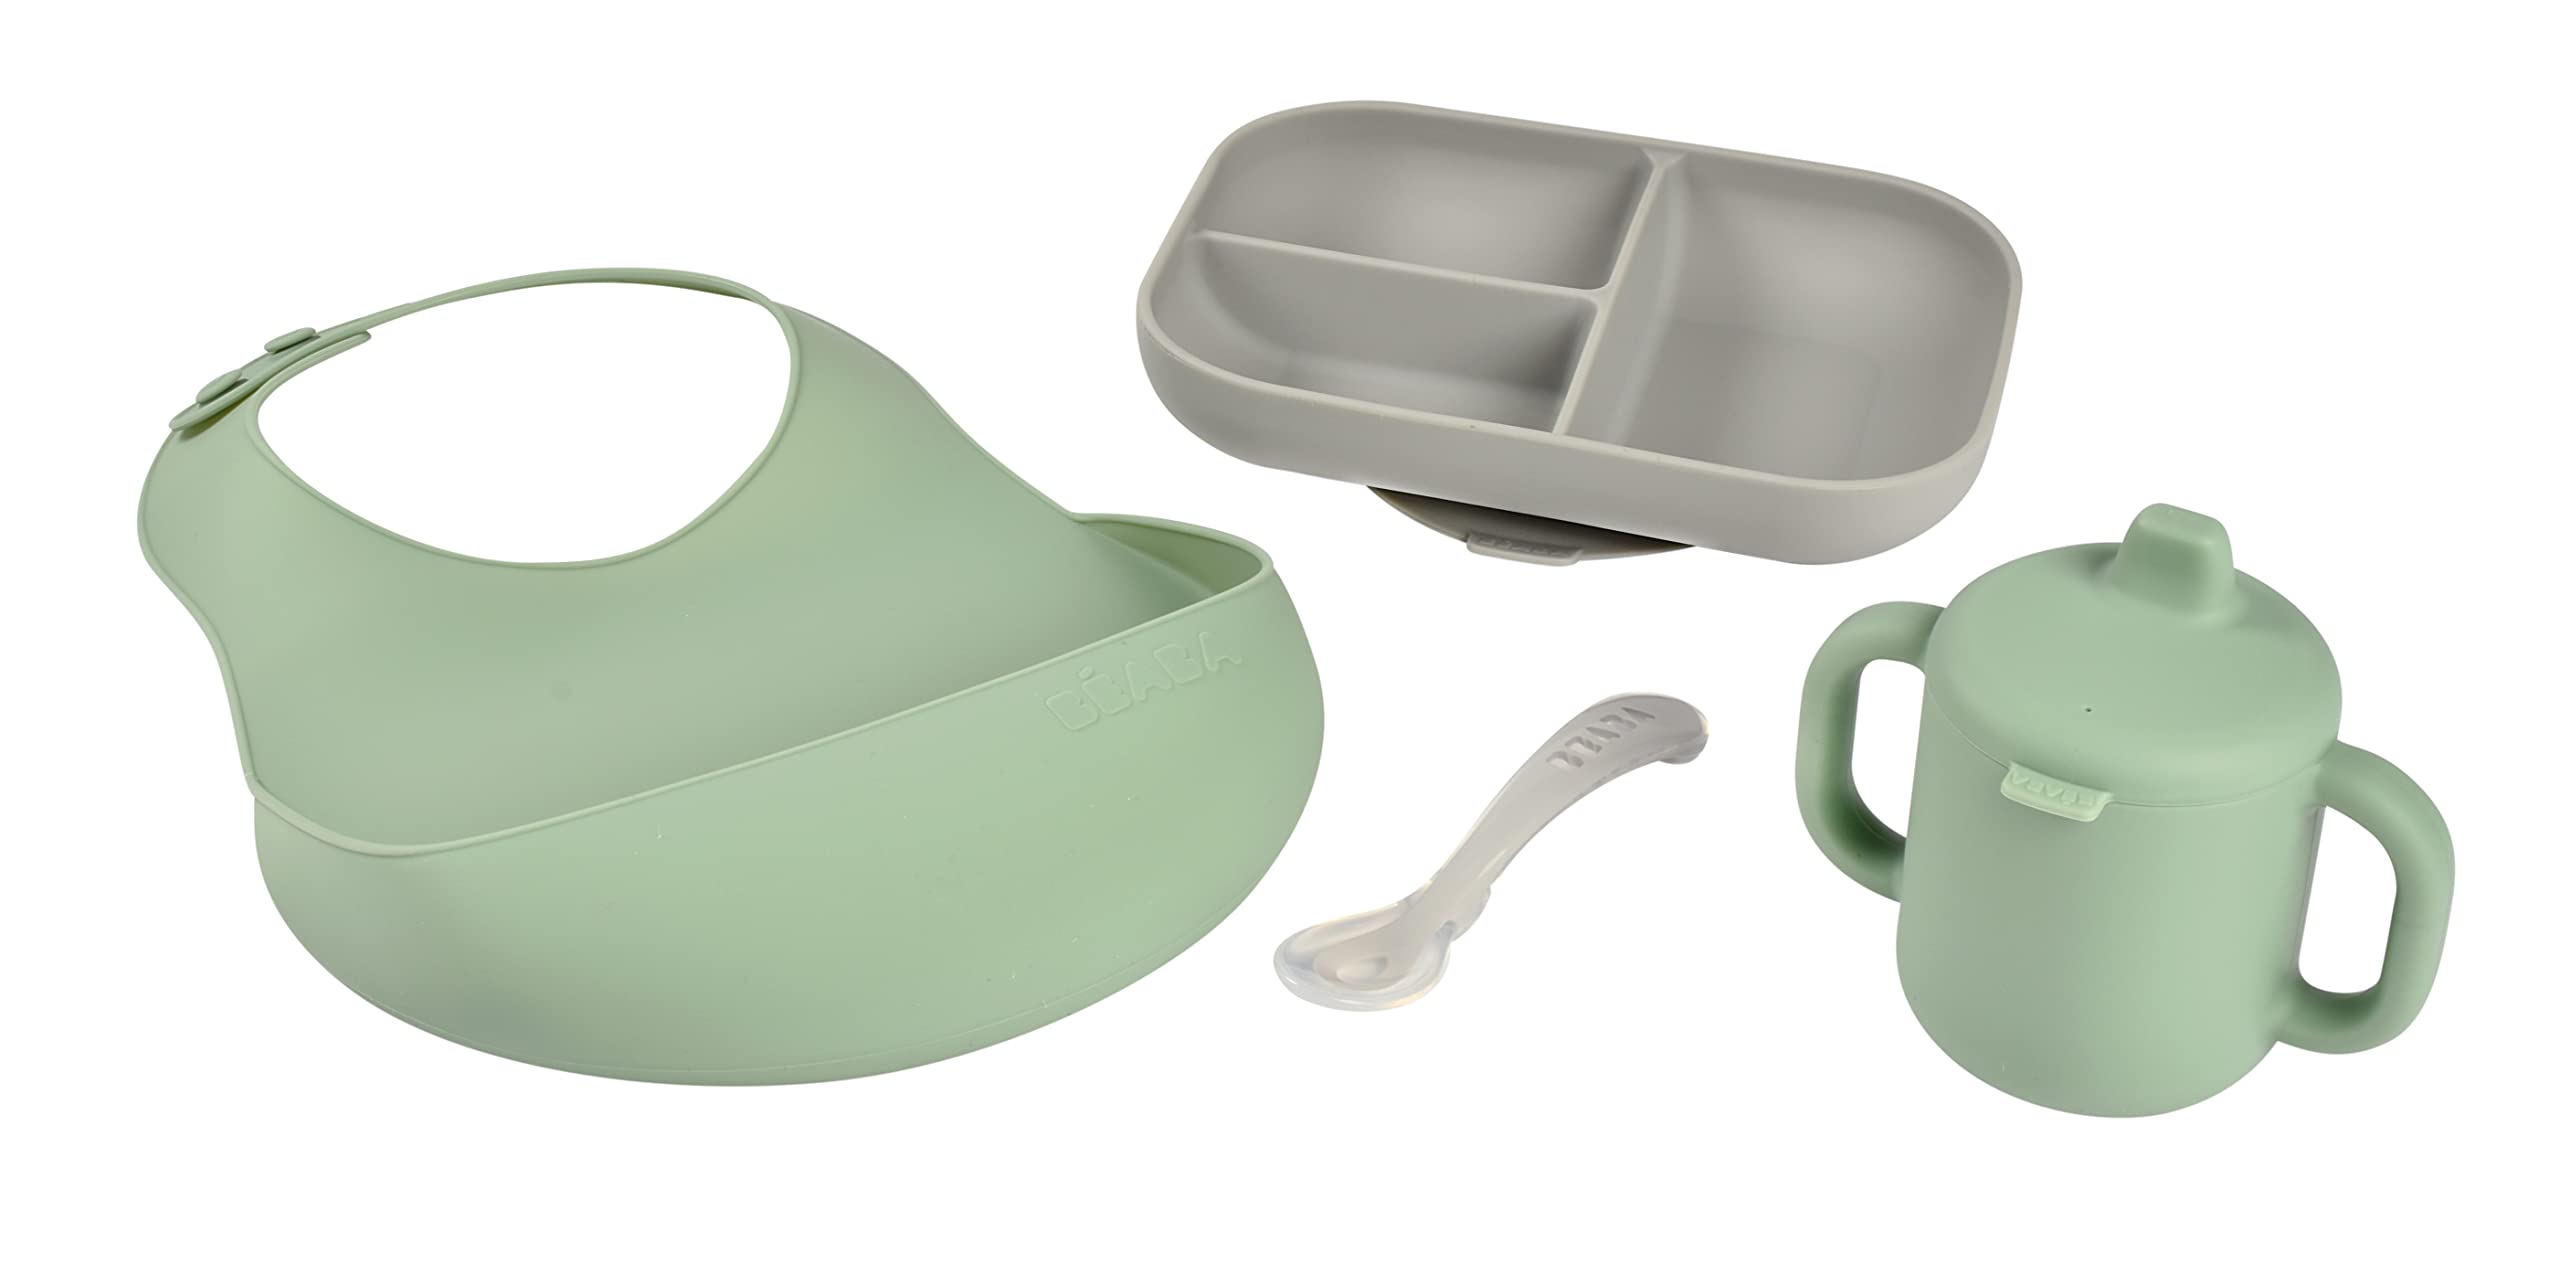 BEABA The Essentials Silicone Meal Set of 4, 100% Silicone Baby Plate Set - Dishwasher Safe, Soft, Unbreakable - Includes Siicone Plate, Sippy Cup, Bib and Spoon, Grey/Sage